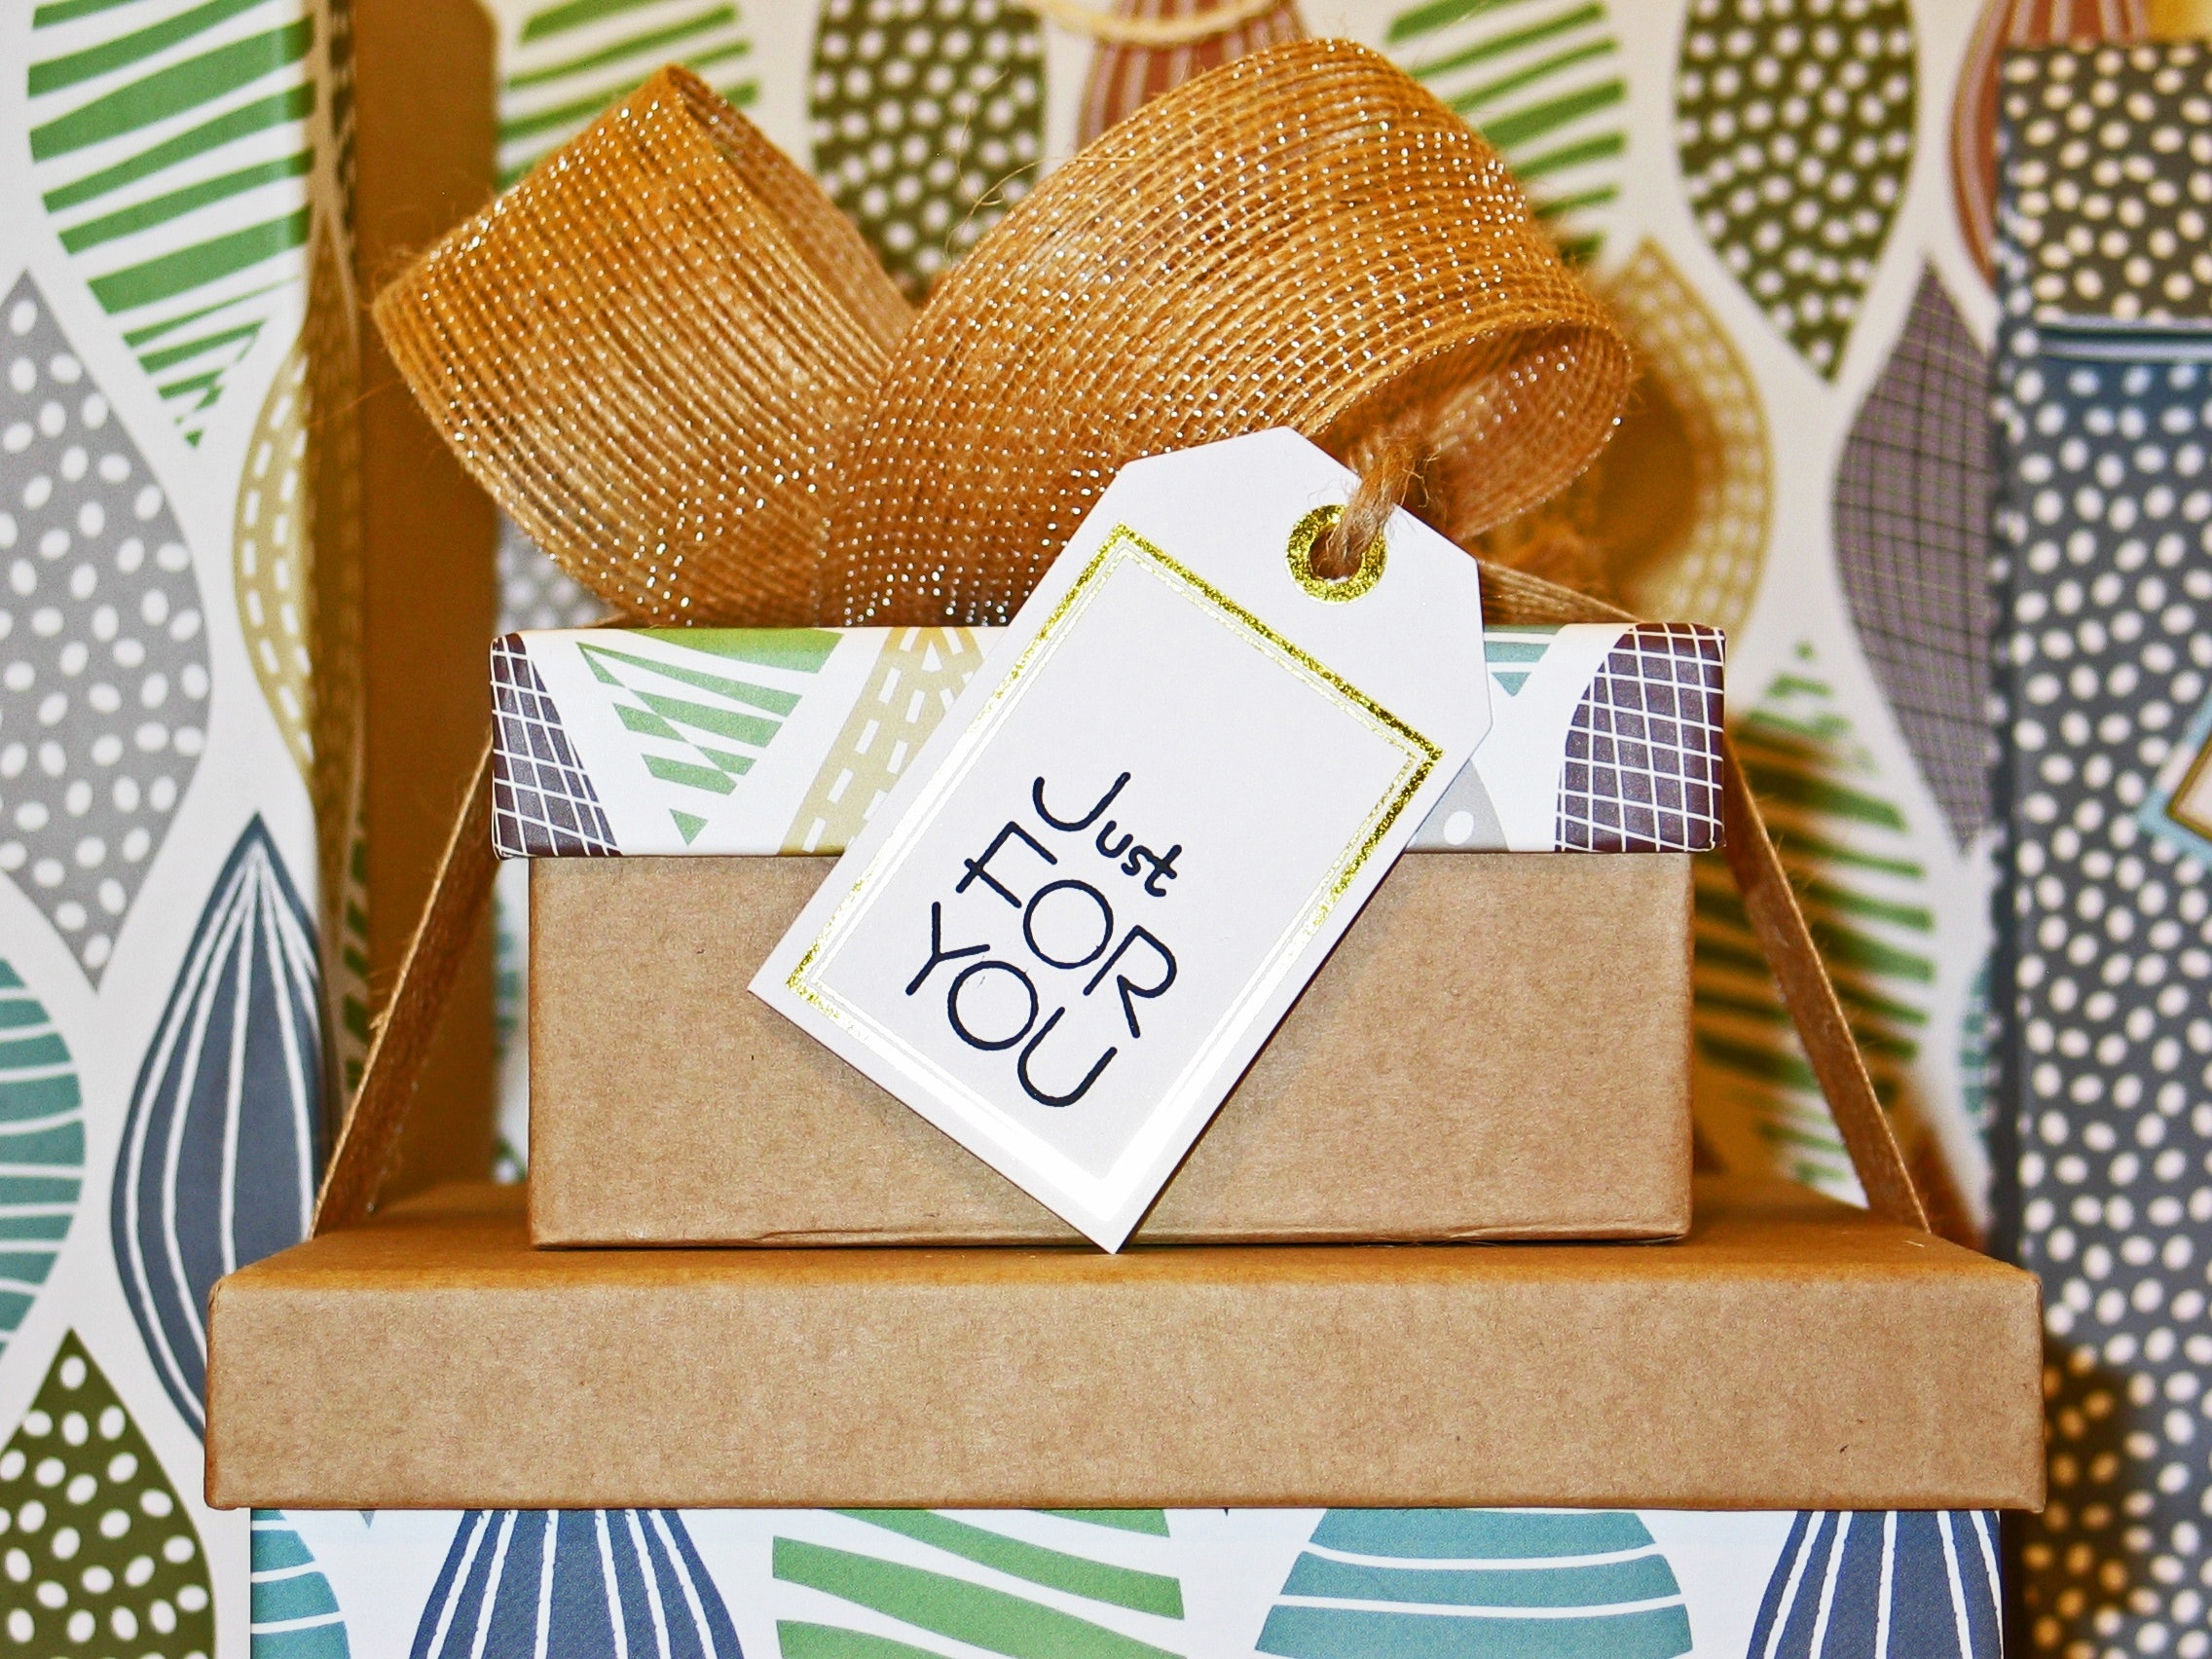 Tips & Tricks Tuesday: Local Gifts at The Root Salon